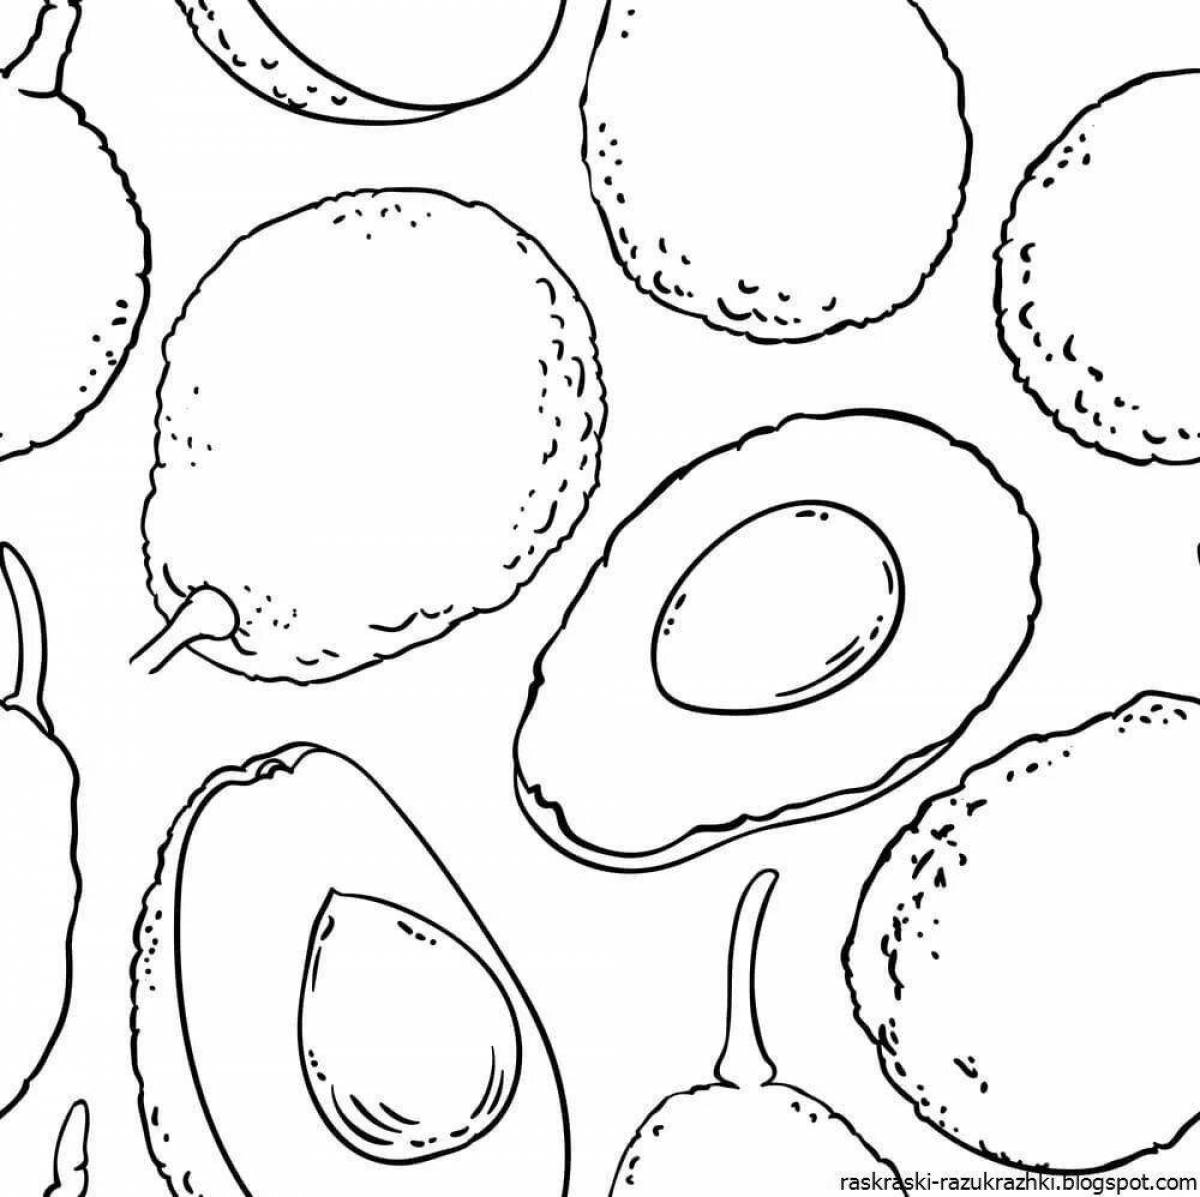 Cute avocado coloring page for girls